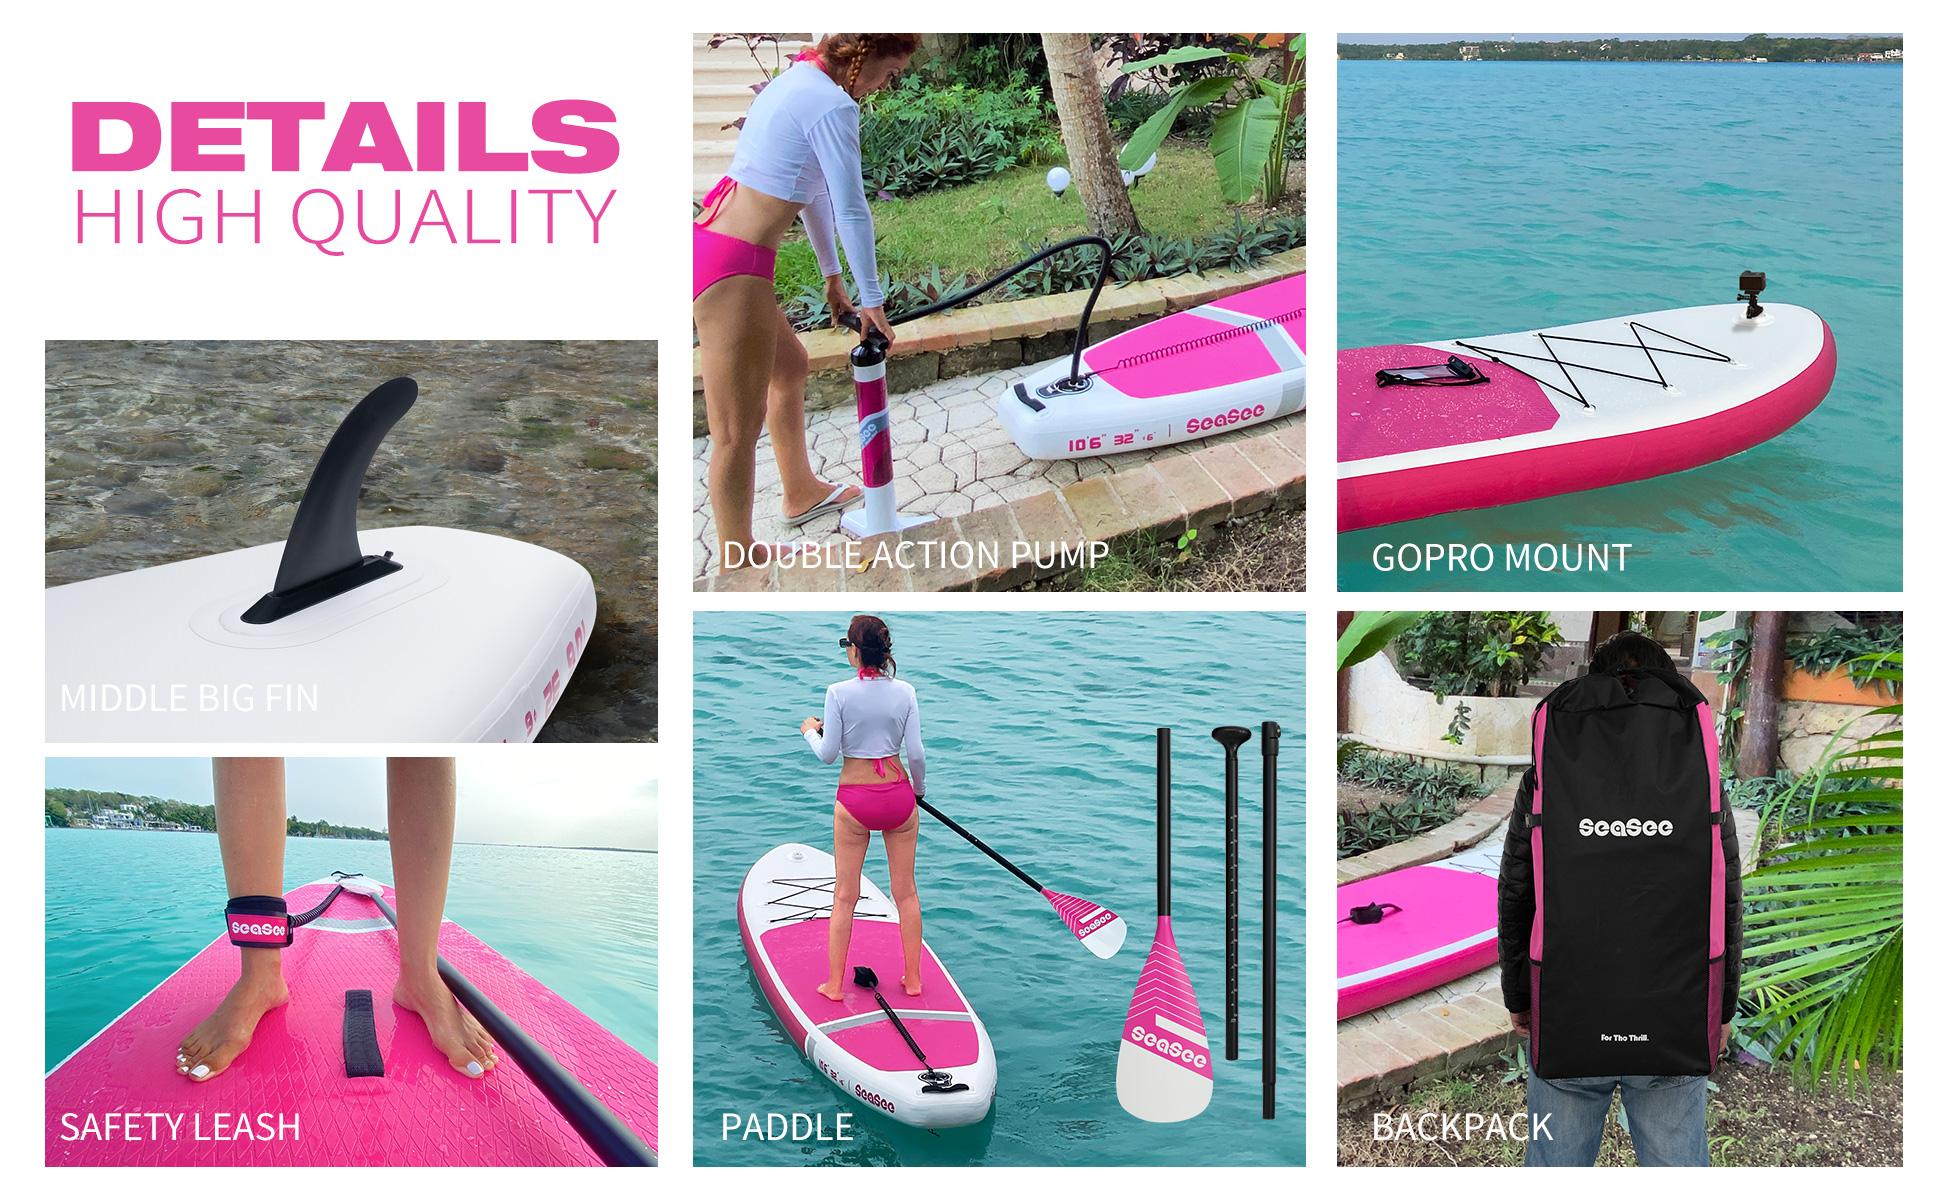 Seaseesup Inflatable Paddle Board Stand Up Paddle Board, Fishing Board